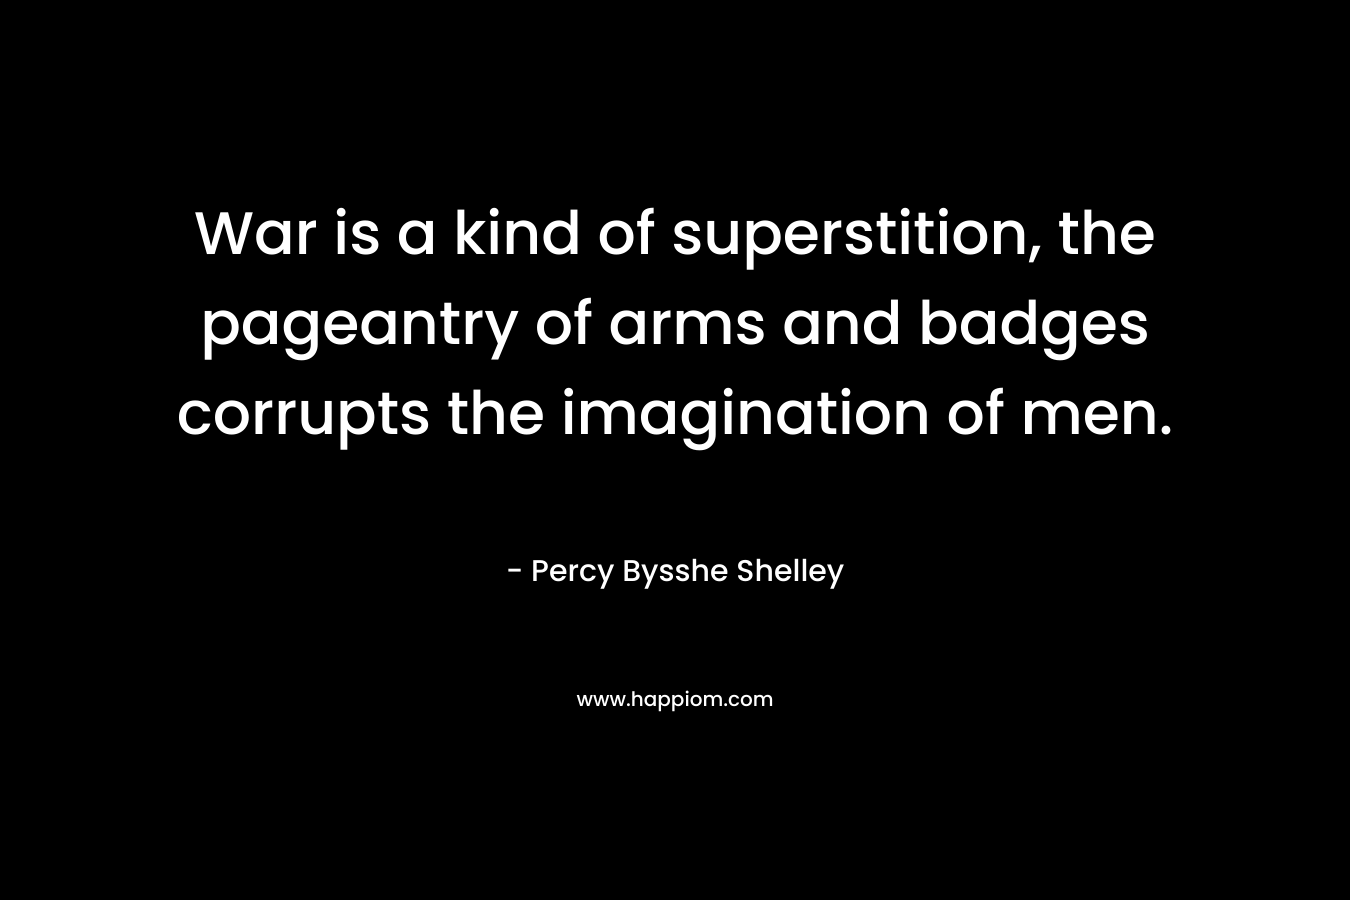 War is a kind of superstition, the pageantry of arms and badges corrupts the imagination of men. – Percy Bysshe Shelley